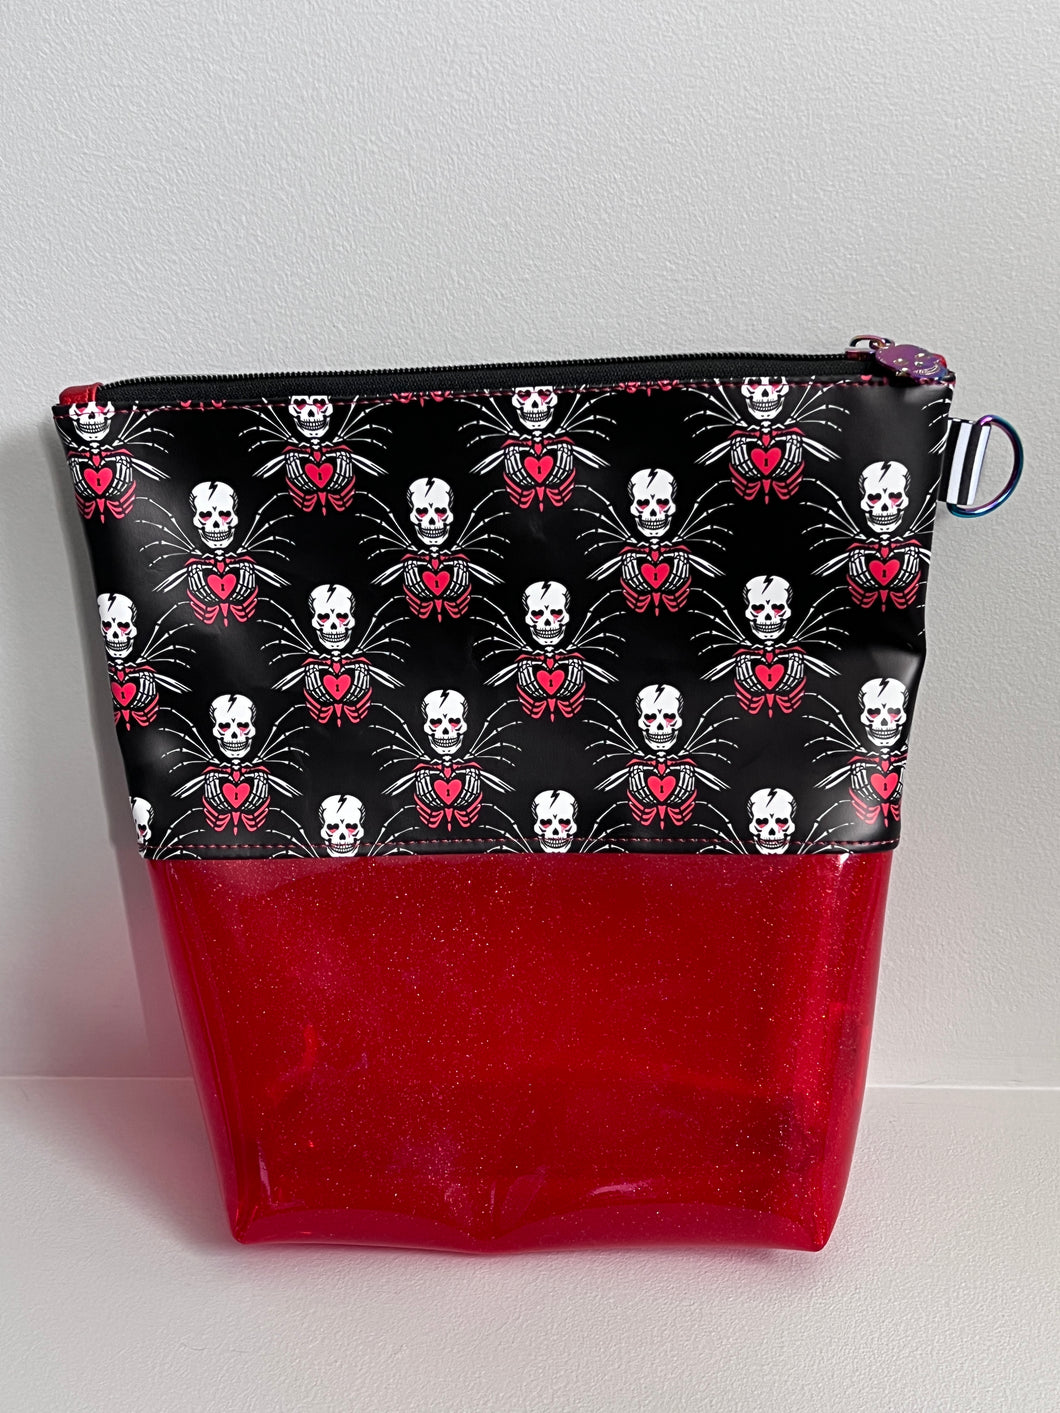 Vinyl Knitting Bags by Slick Chick Bags